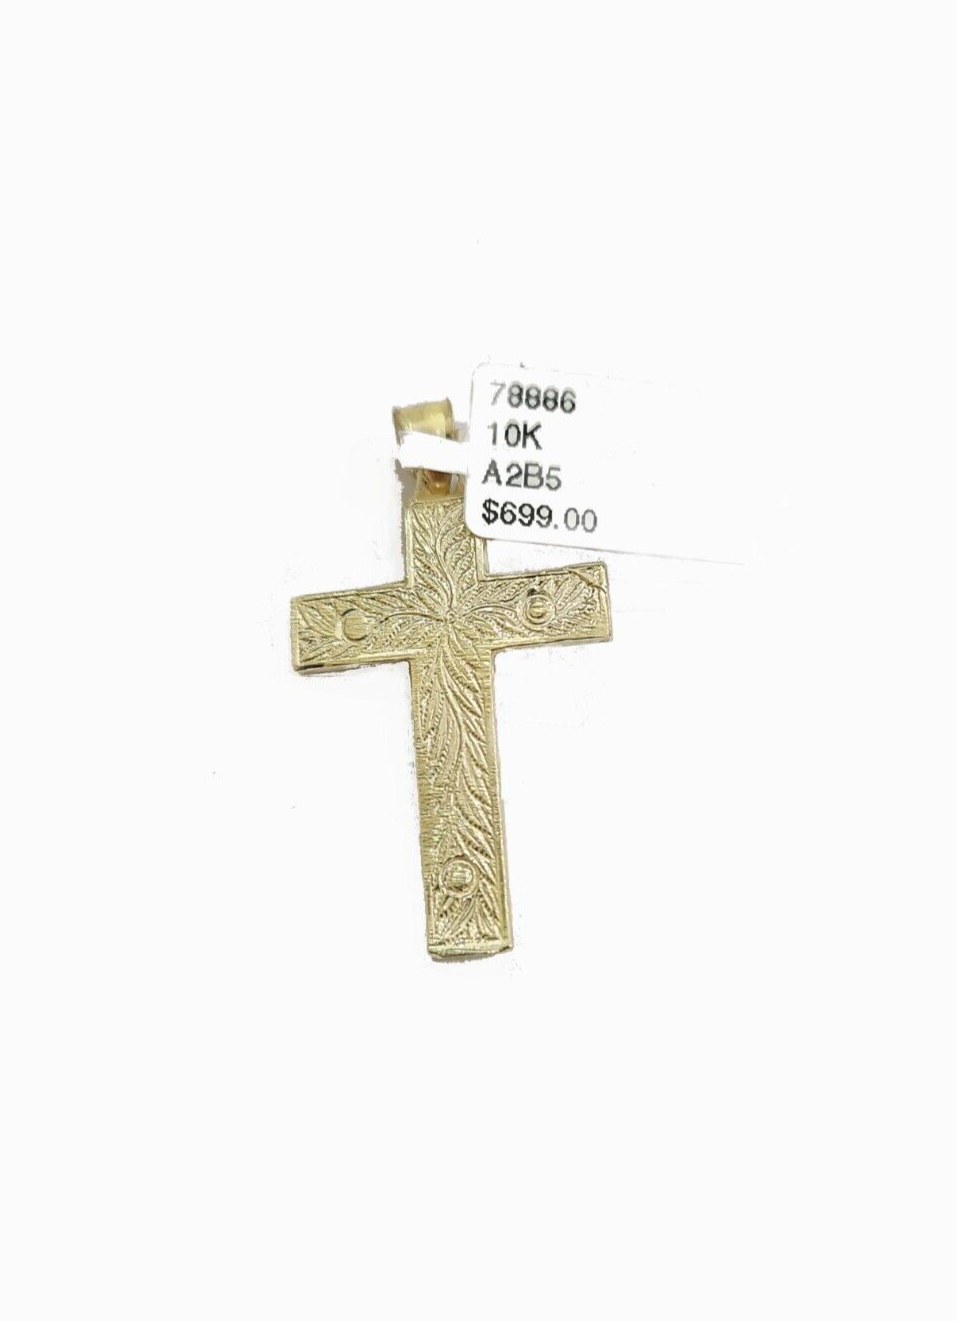 Real 10k Gold Jesus Cross Charm Pendant 10KT Yellow Gold For Chain & Necklace